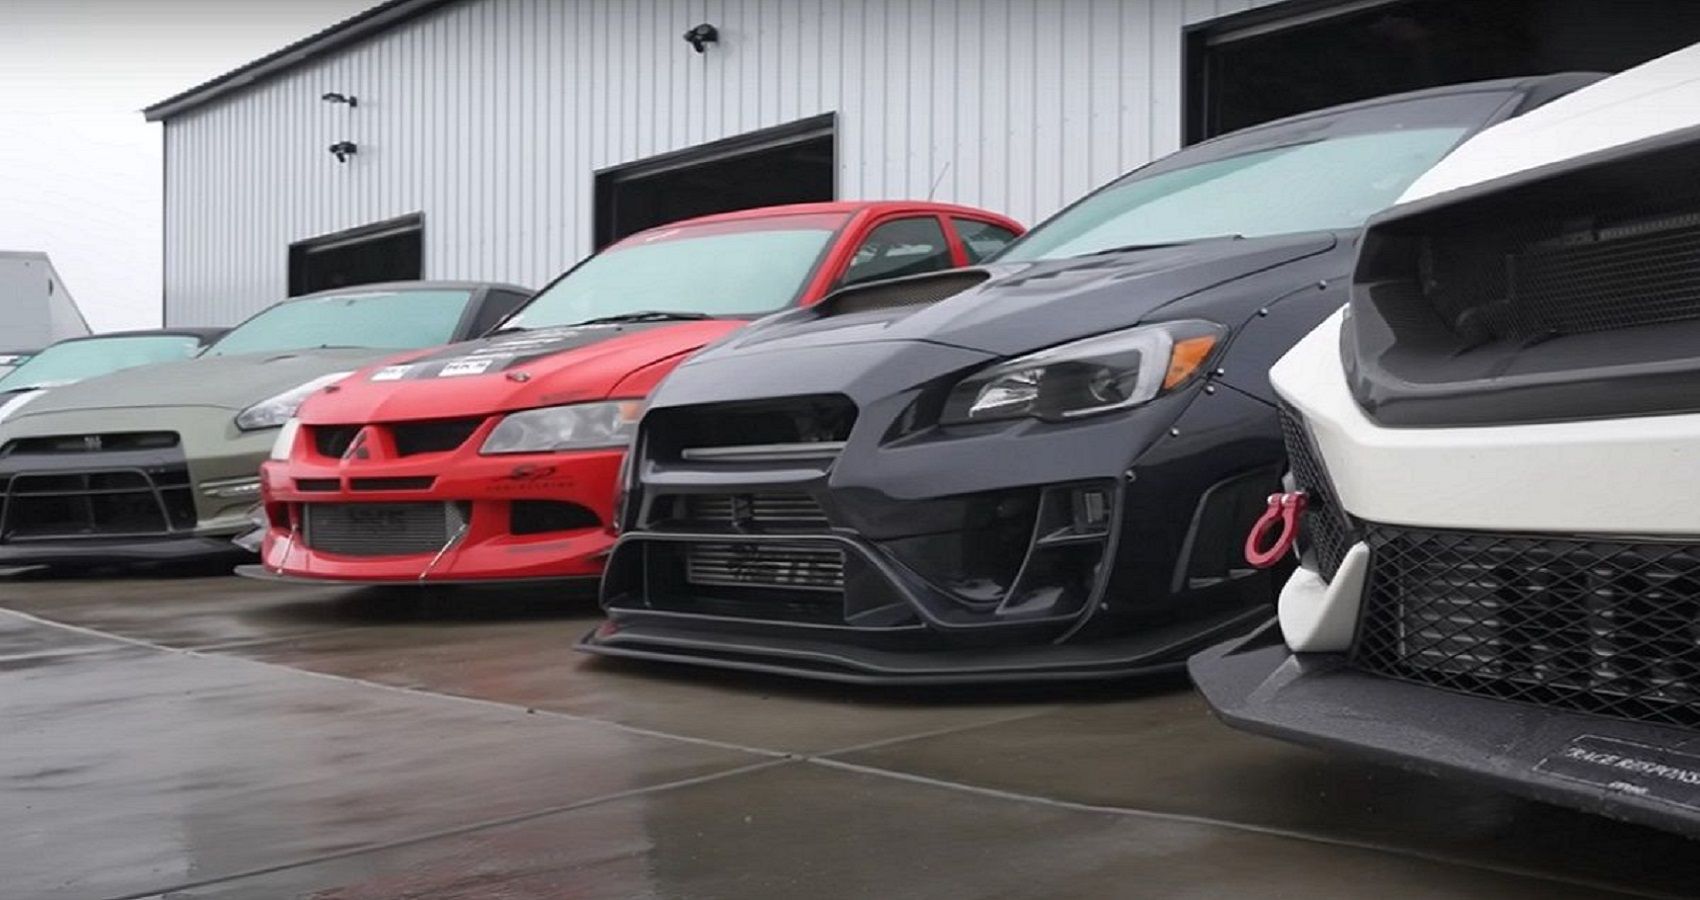 This Collector’s JDM Car Collection Features An Awesome Arsenal Of Japanese Icons And Track Weapons